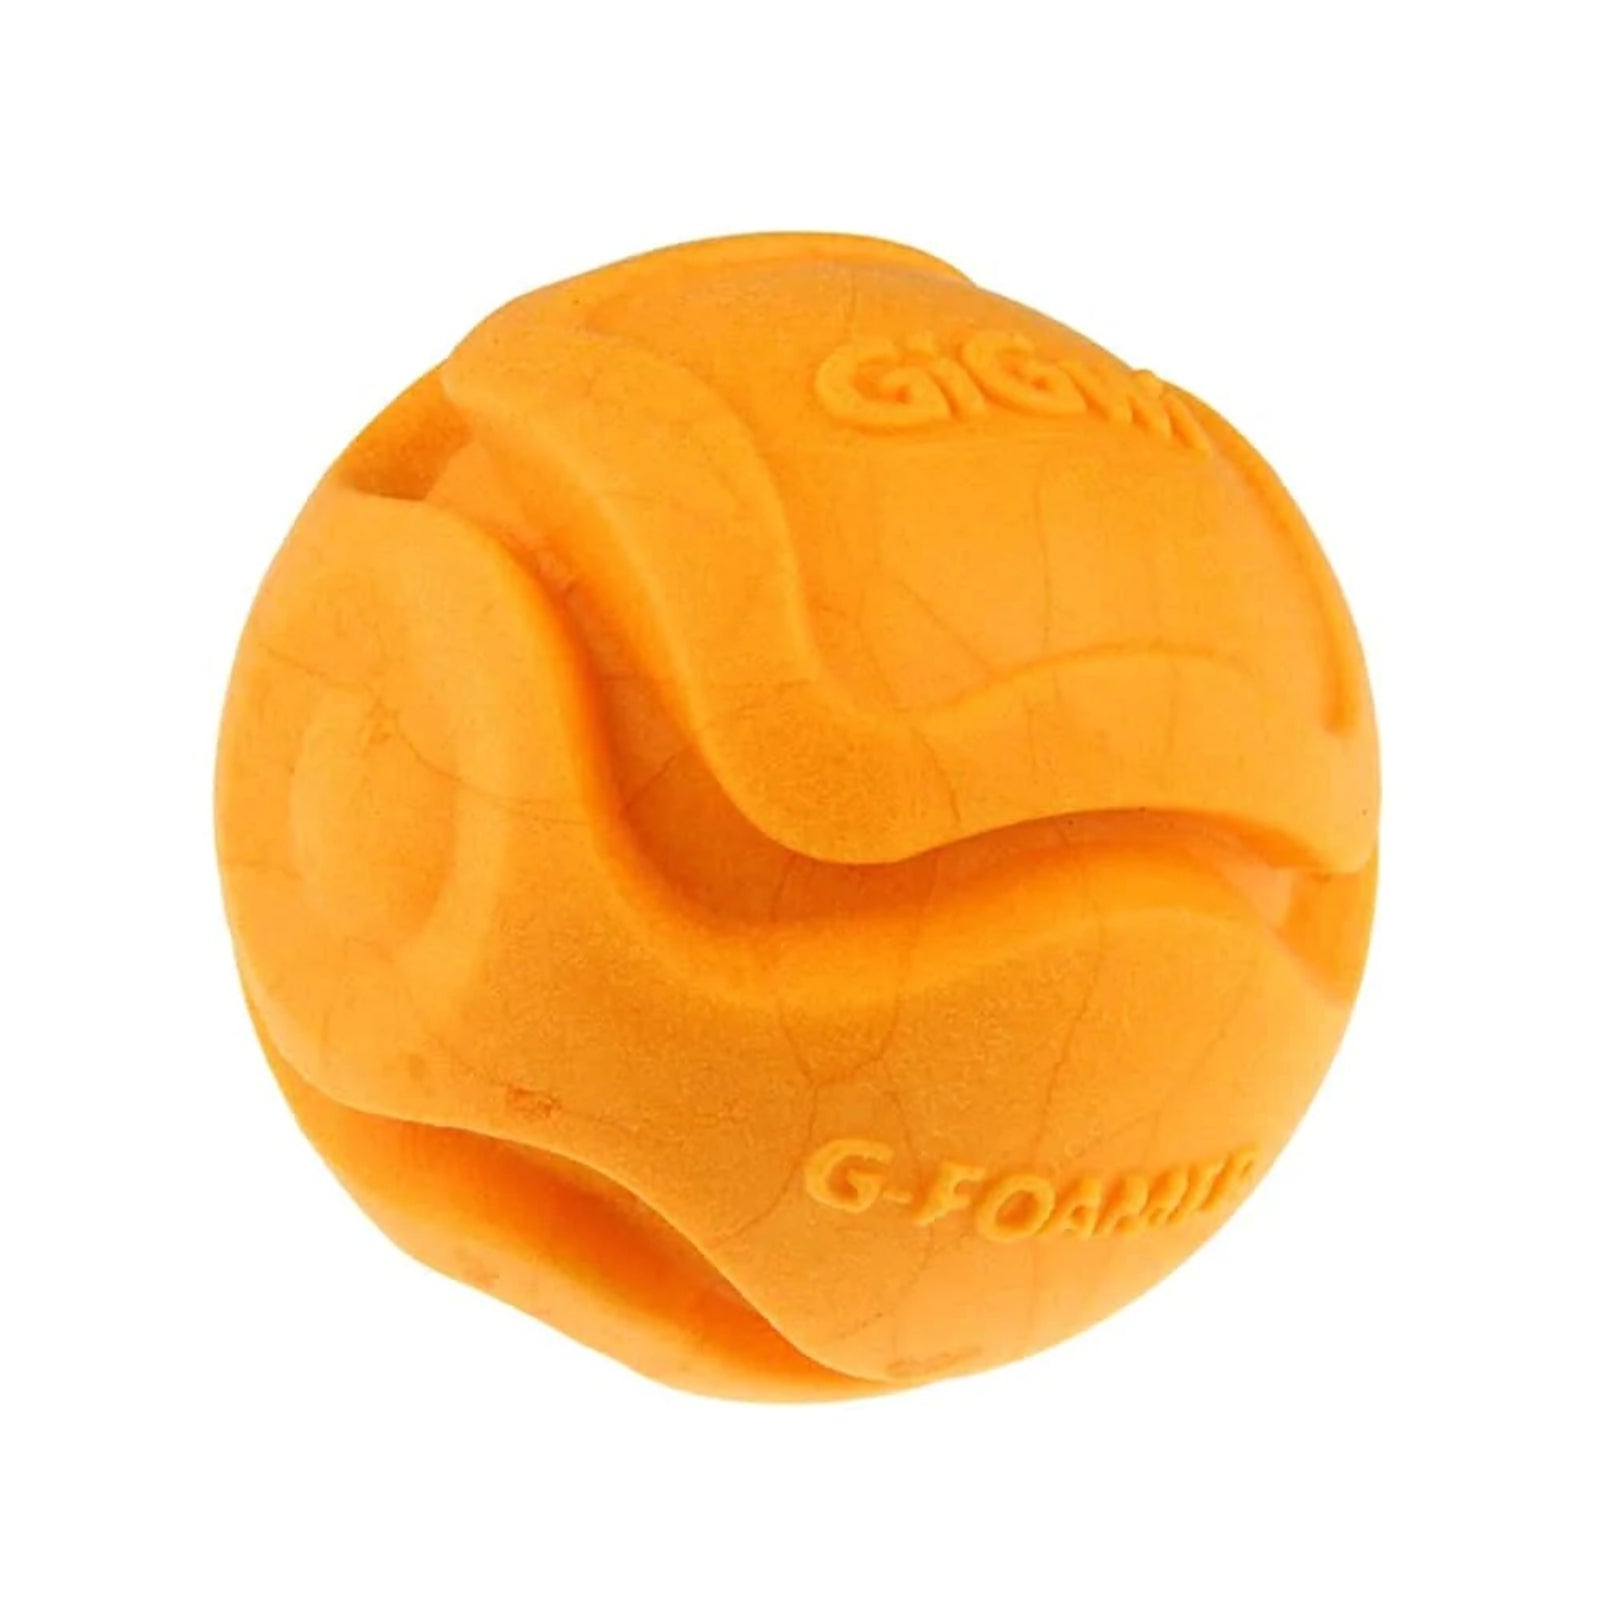 GIGWI G-Foamer Orange Ball Interactive Rubber Toy for Dogs